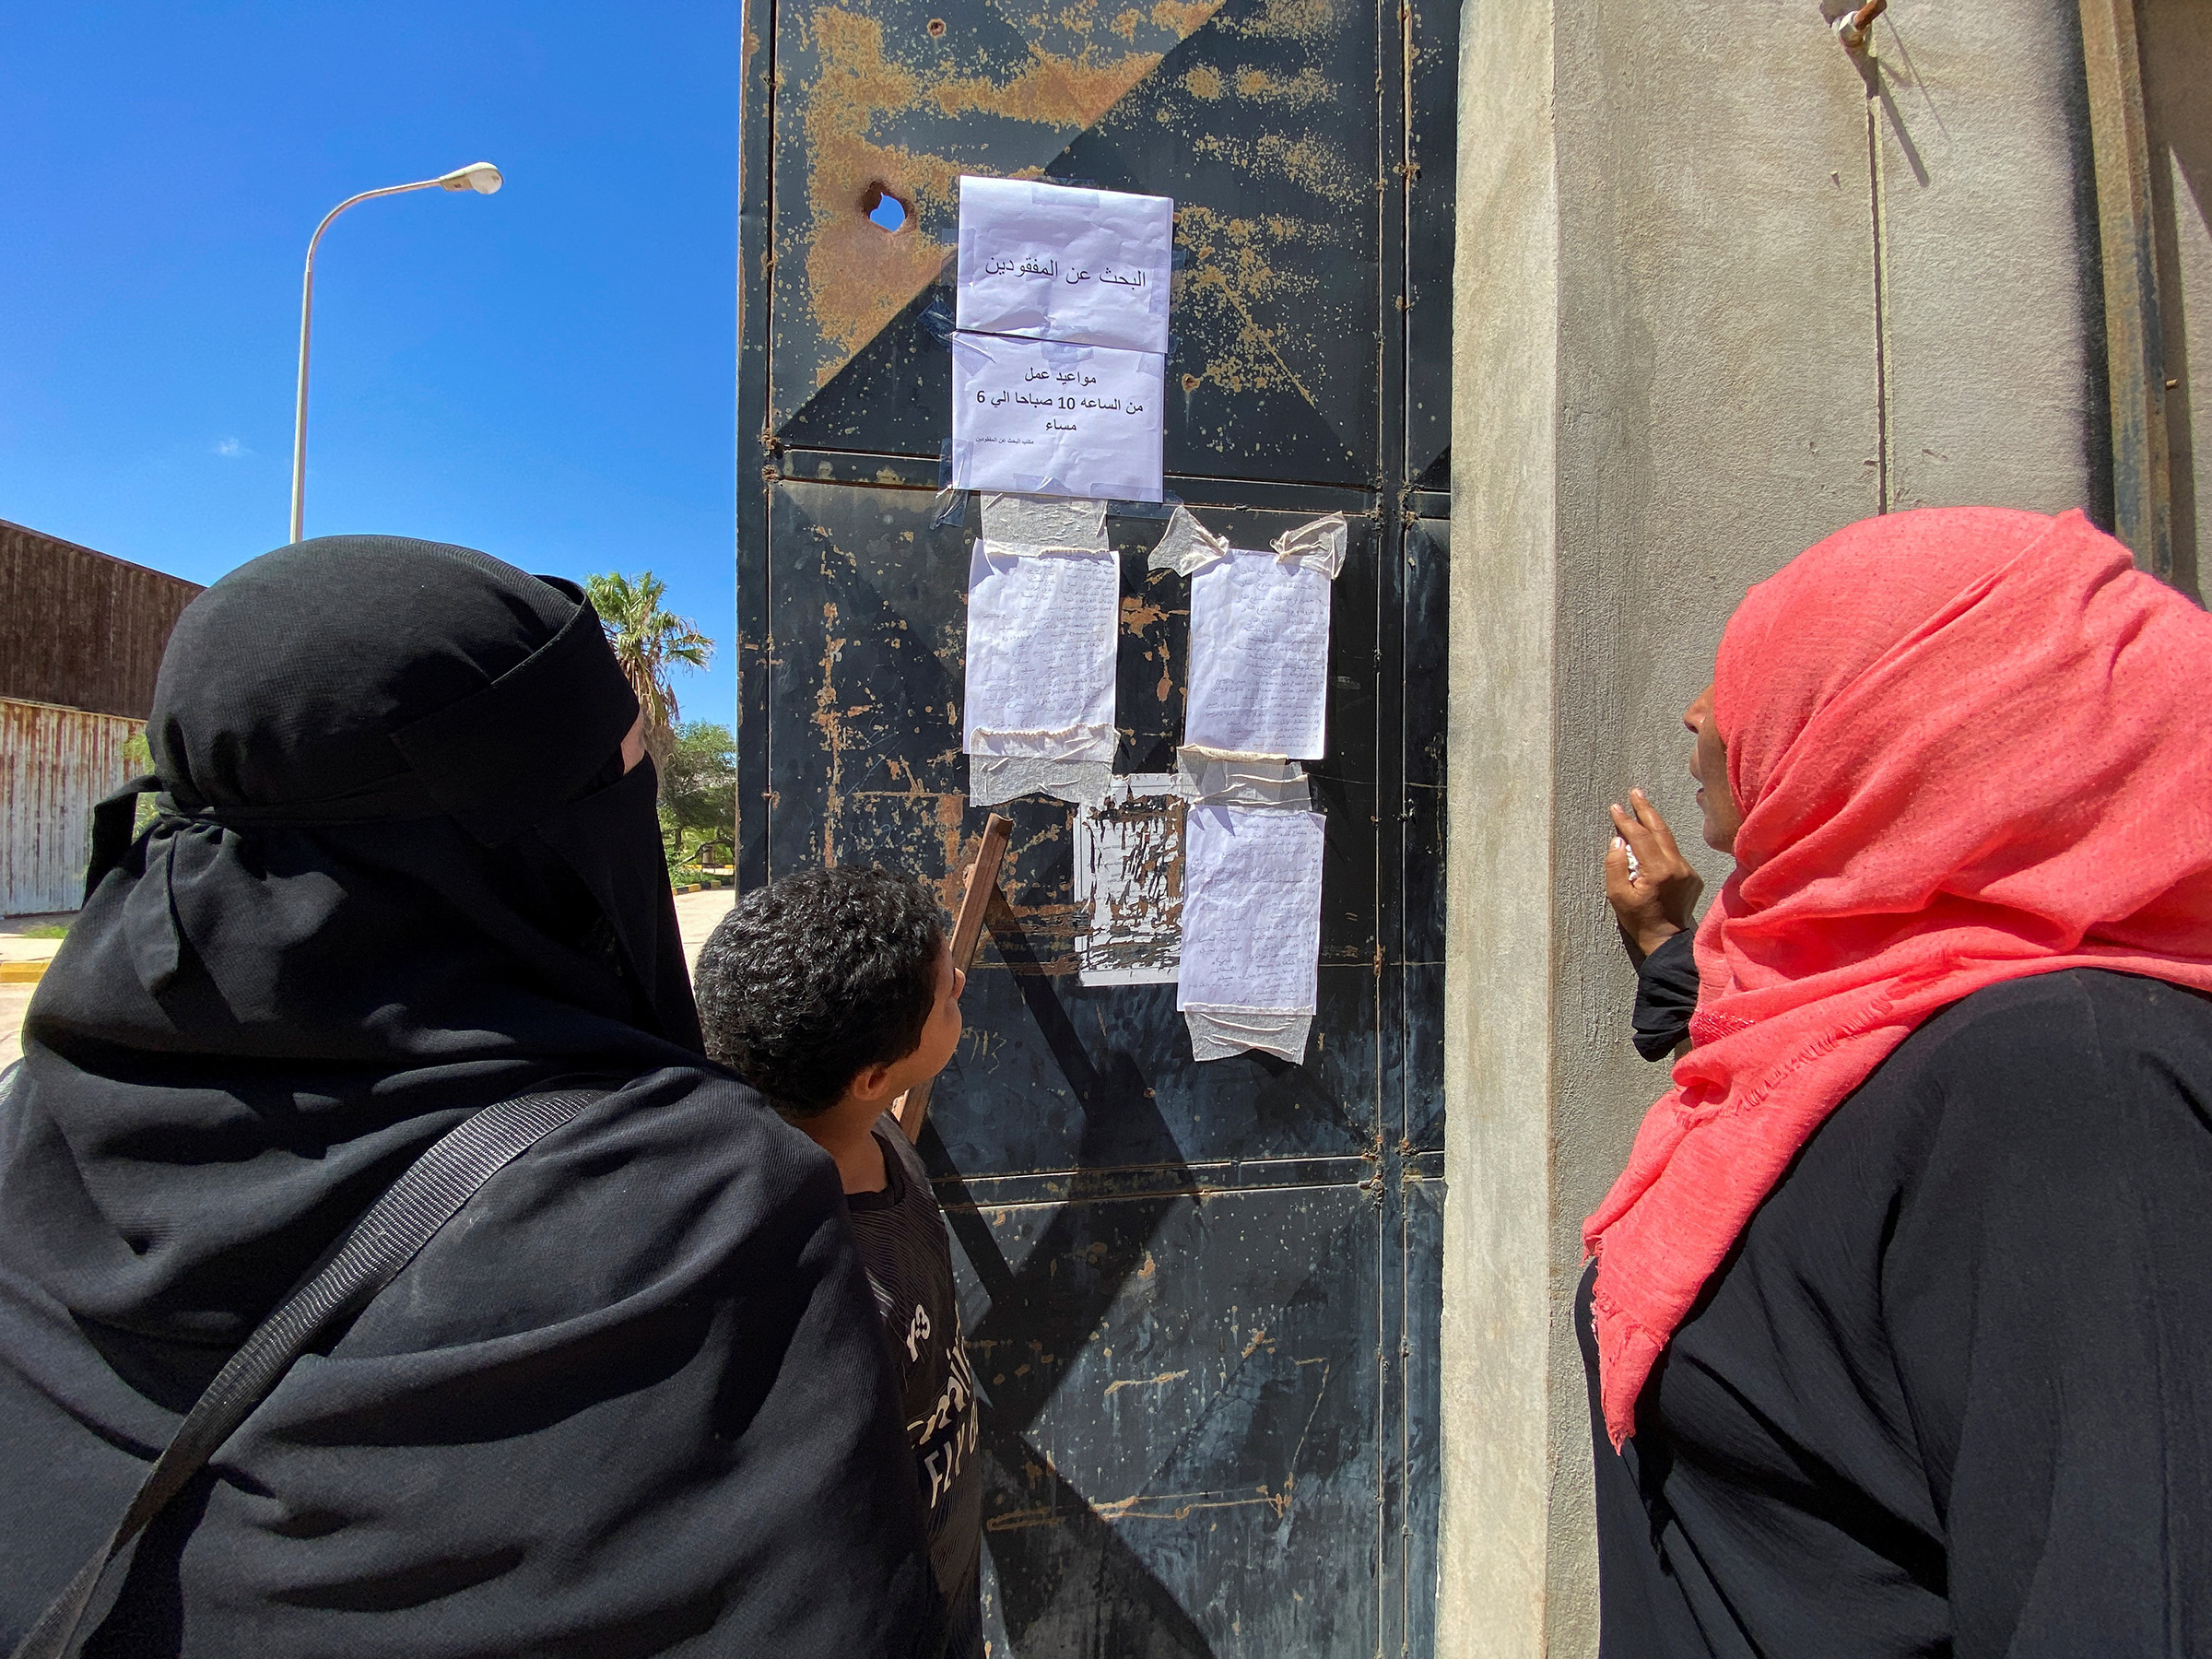 People look at the list of missing people in the aftermath of the floods in Derna on Sept. 14. (Esam Omran Al-Fetori—Reuters)